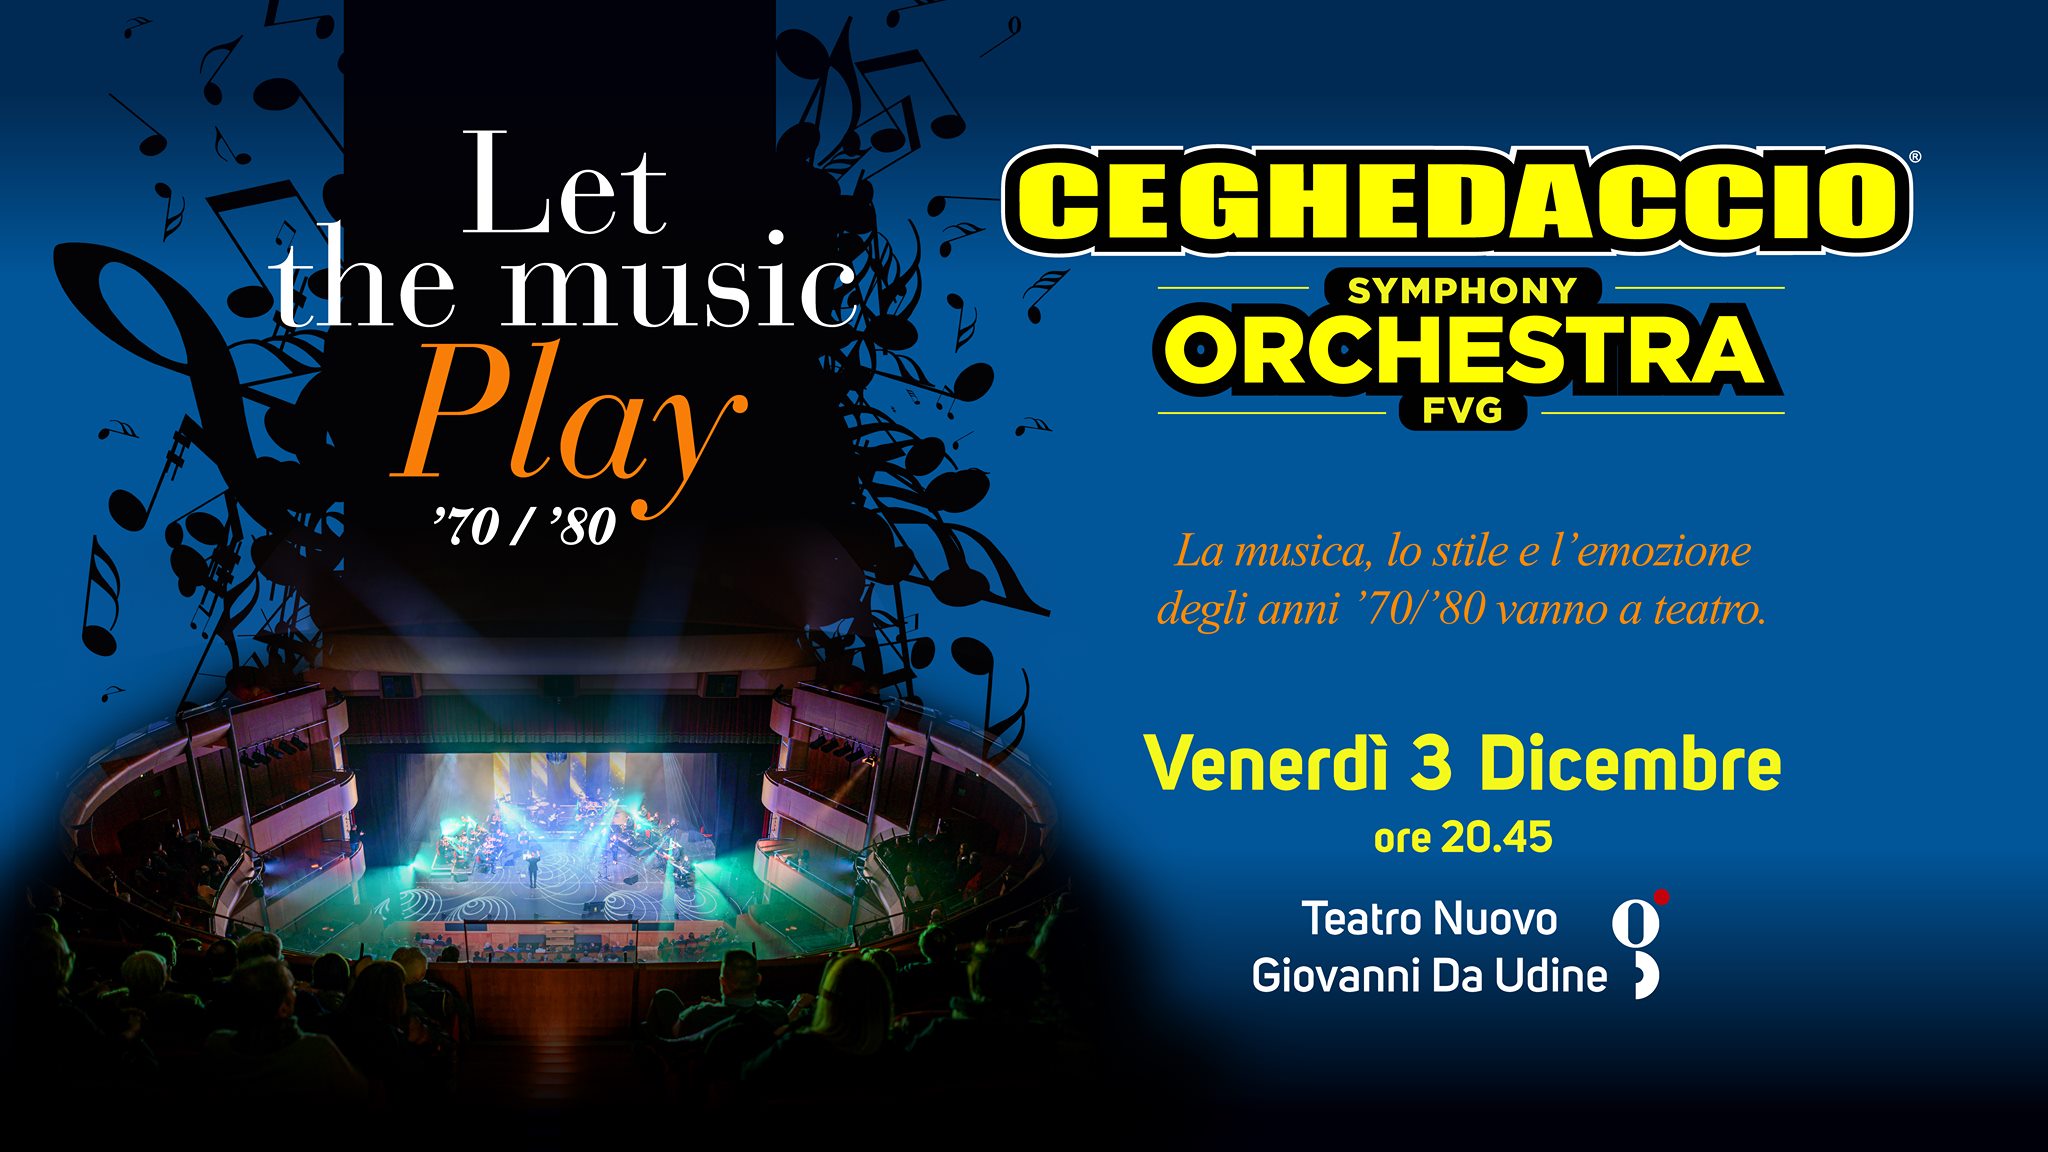 Let The Music Play • Ceghedaccio Symphony Orchestra Fvg - EventiFVG.it